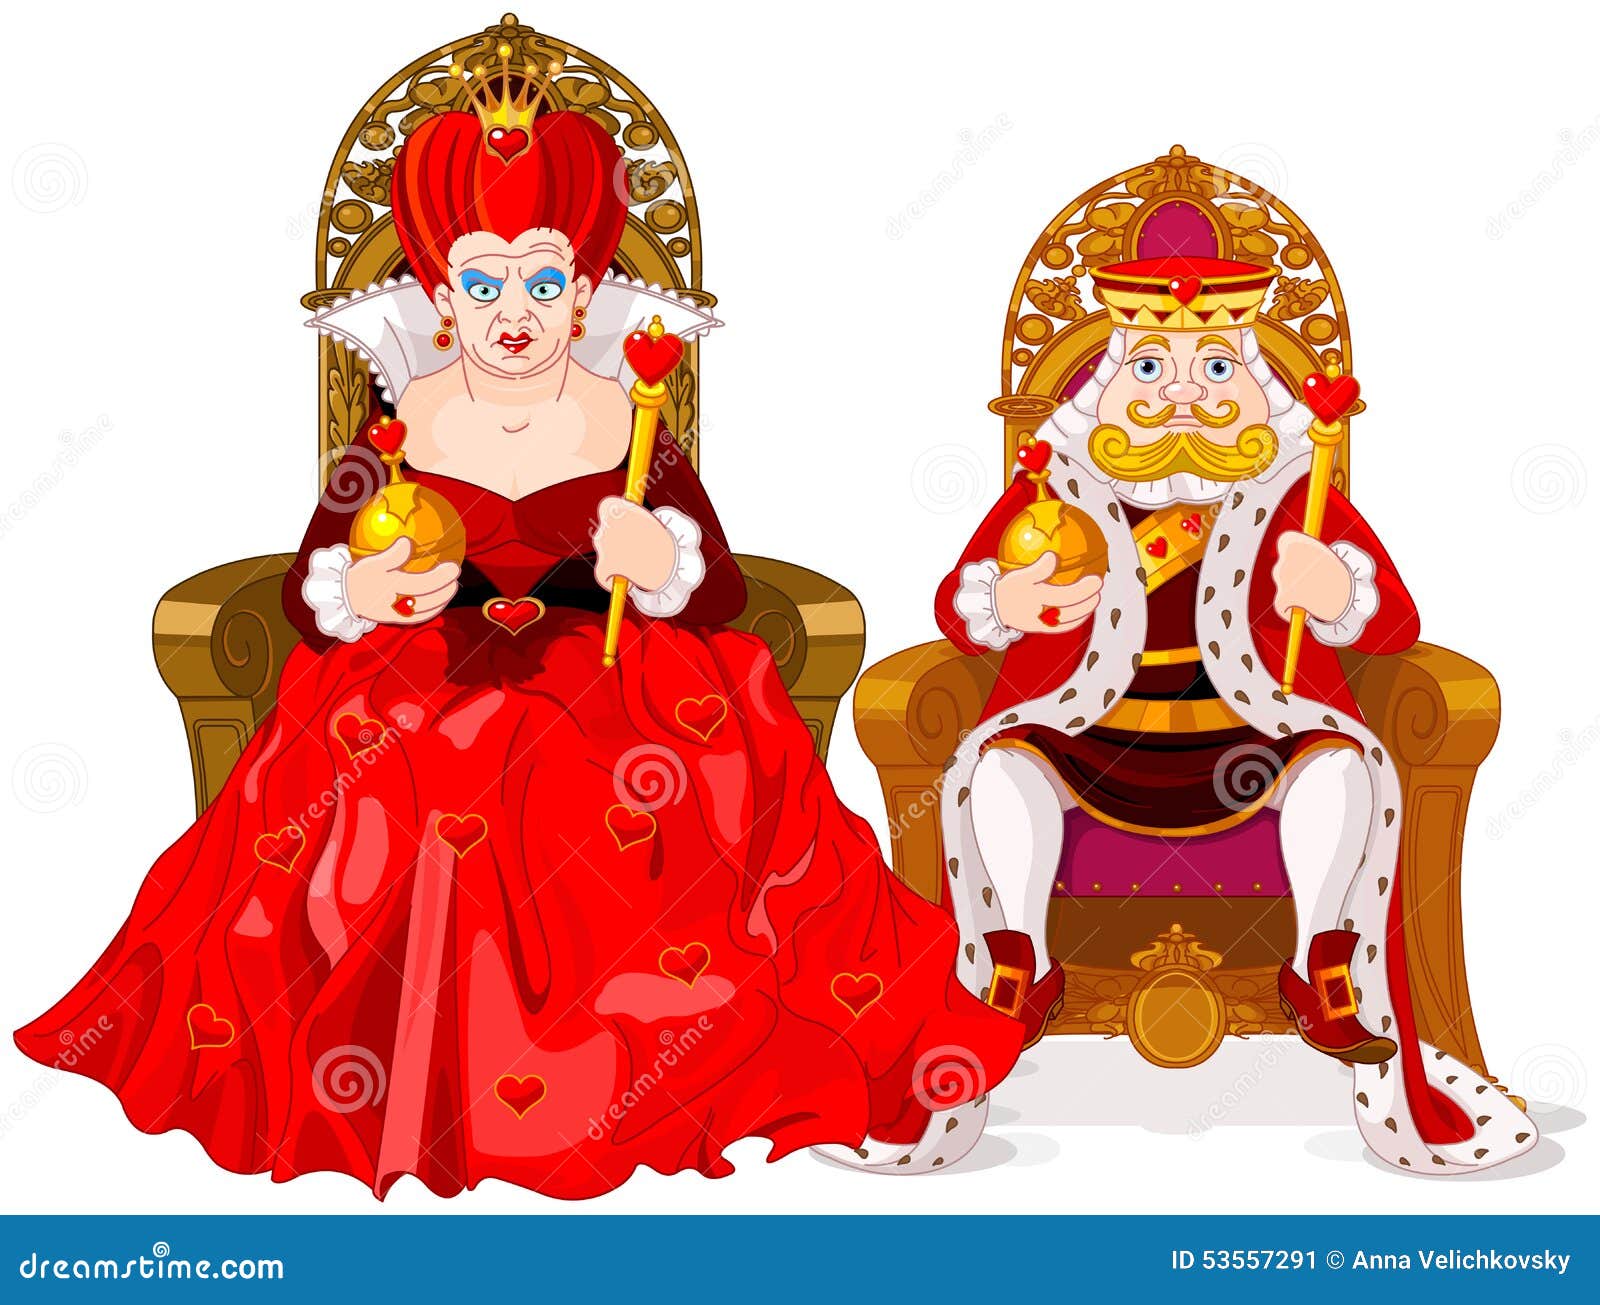 king and queen clipart free - photo #34